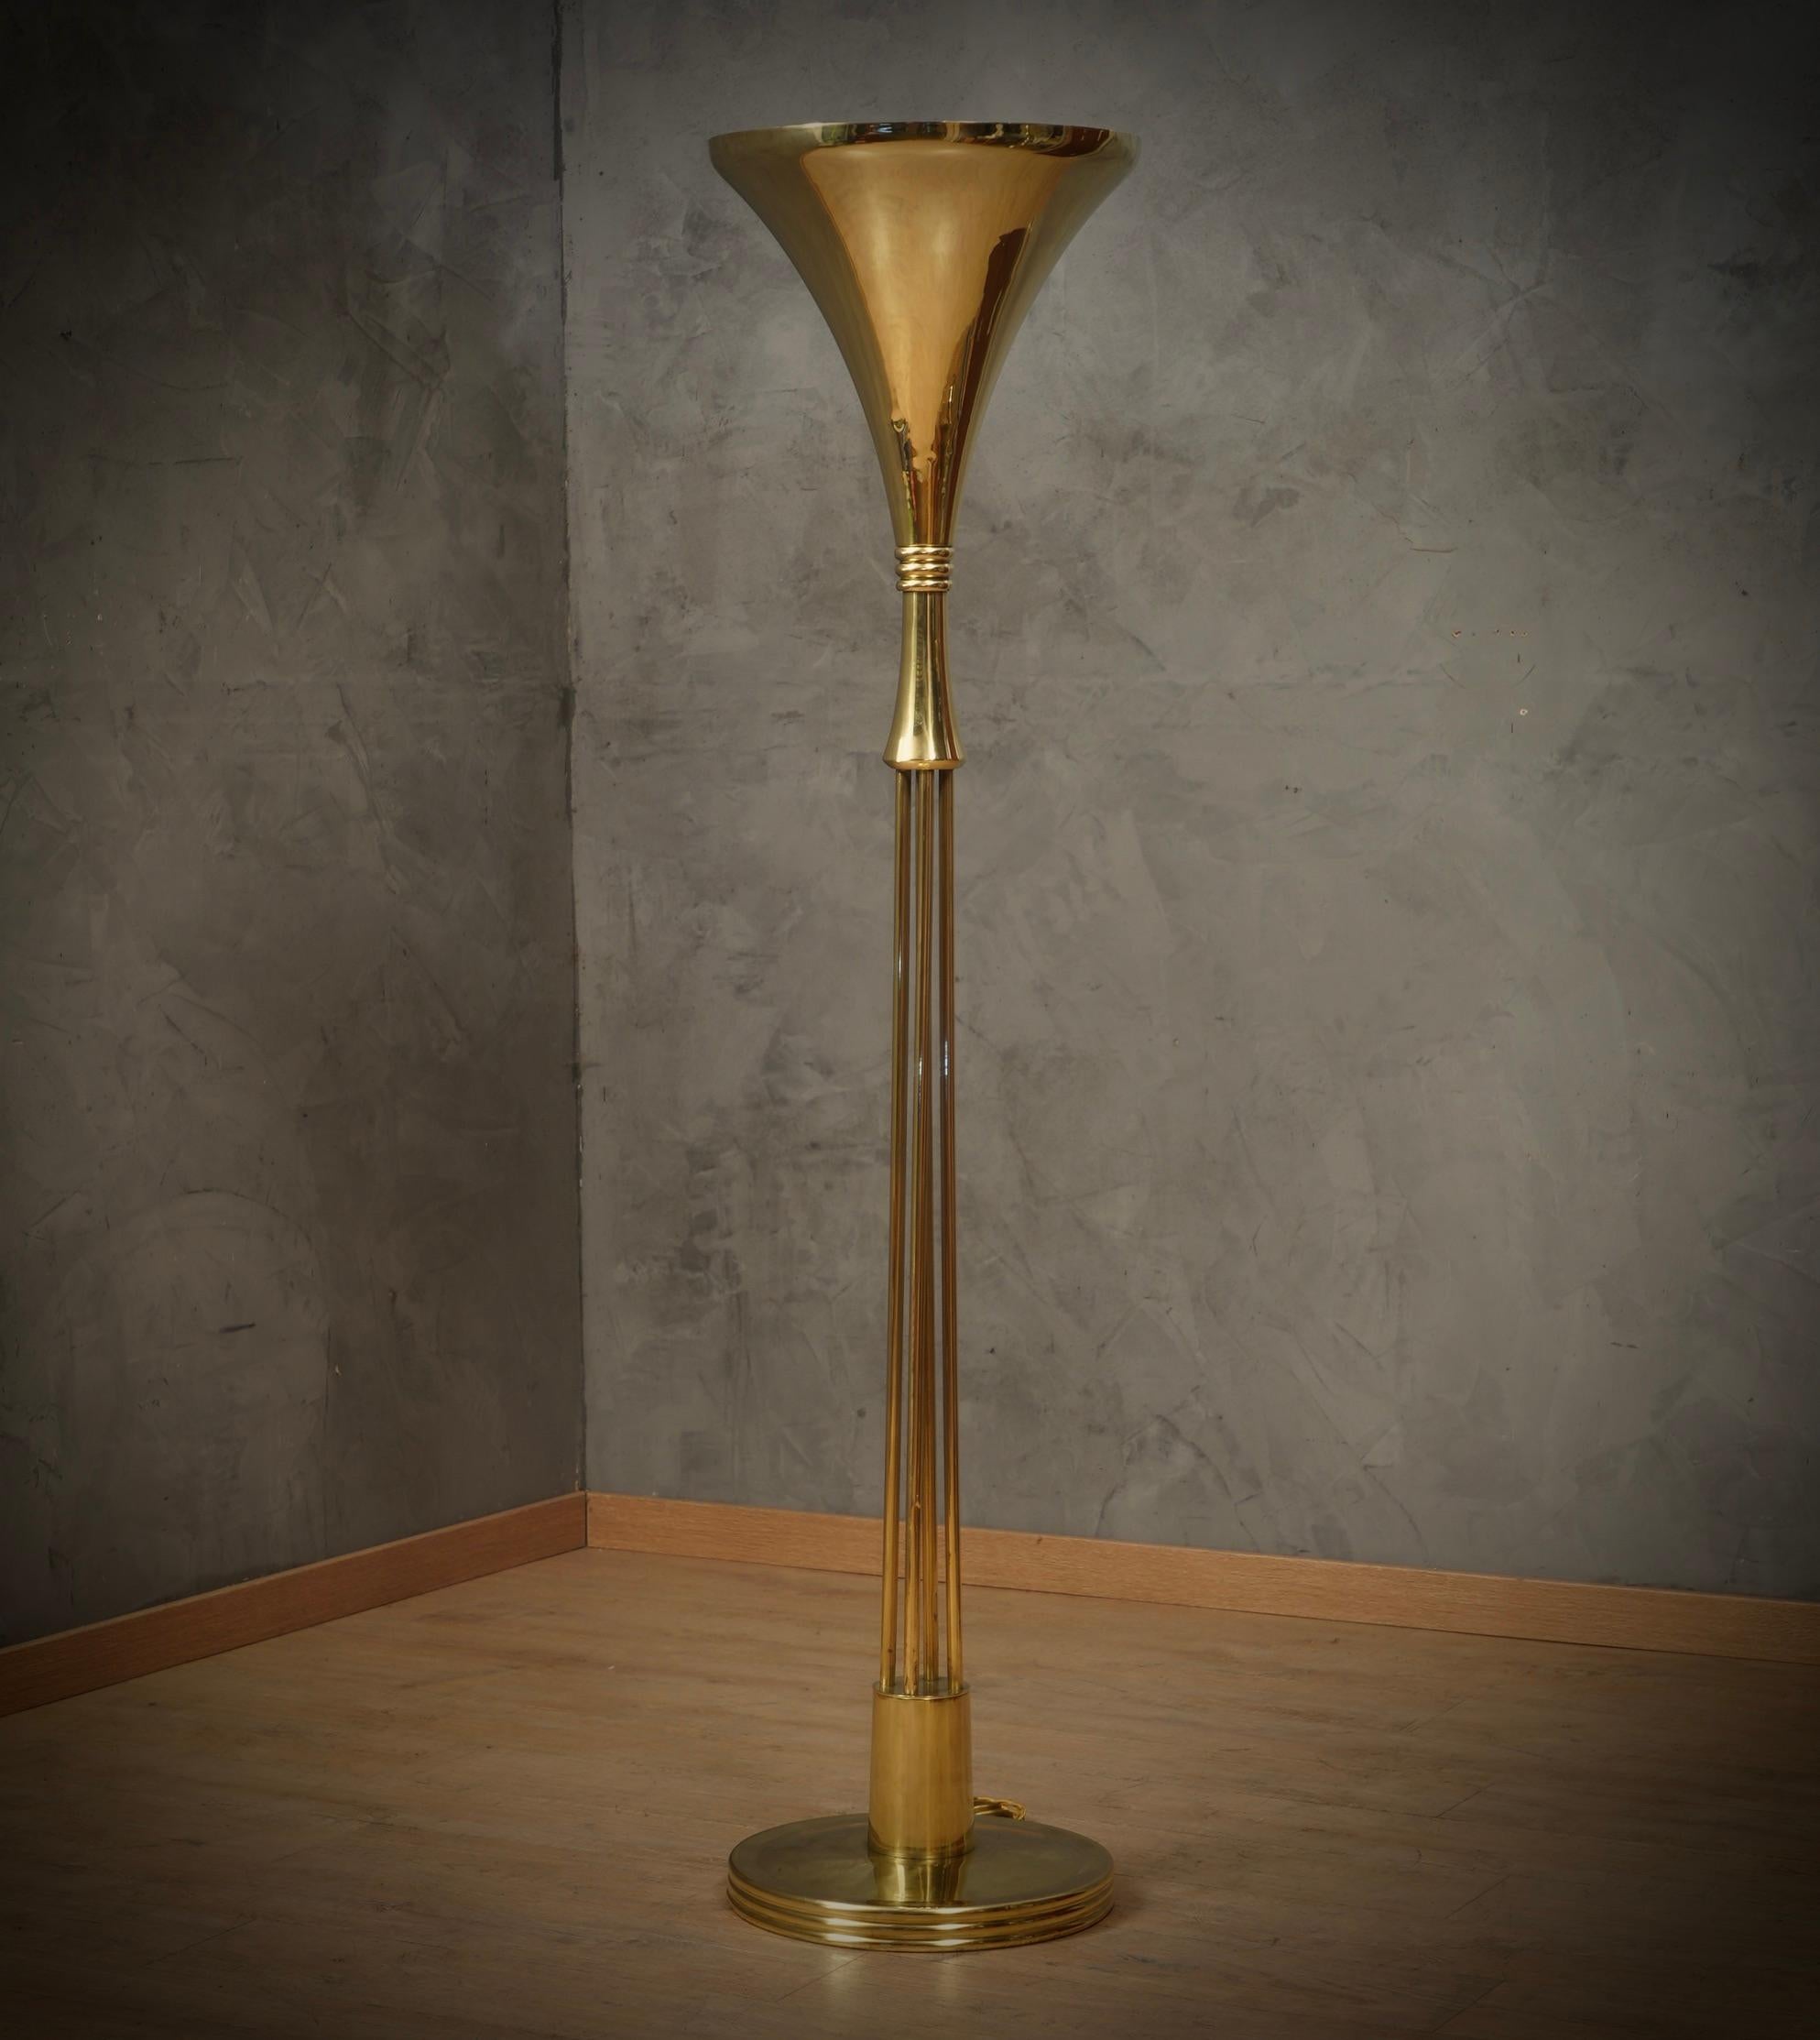 Exquisite furniture that exemplifies timeless design and exceptional craftsmanship. The floor lamp is very linear and will perfectly furnish your home space. Aesthetically the floor lamp as a whole is wonderful. Meticulous and detailed workmanship